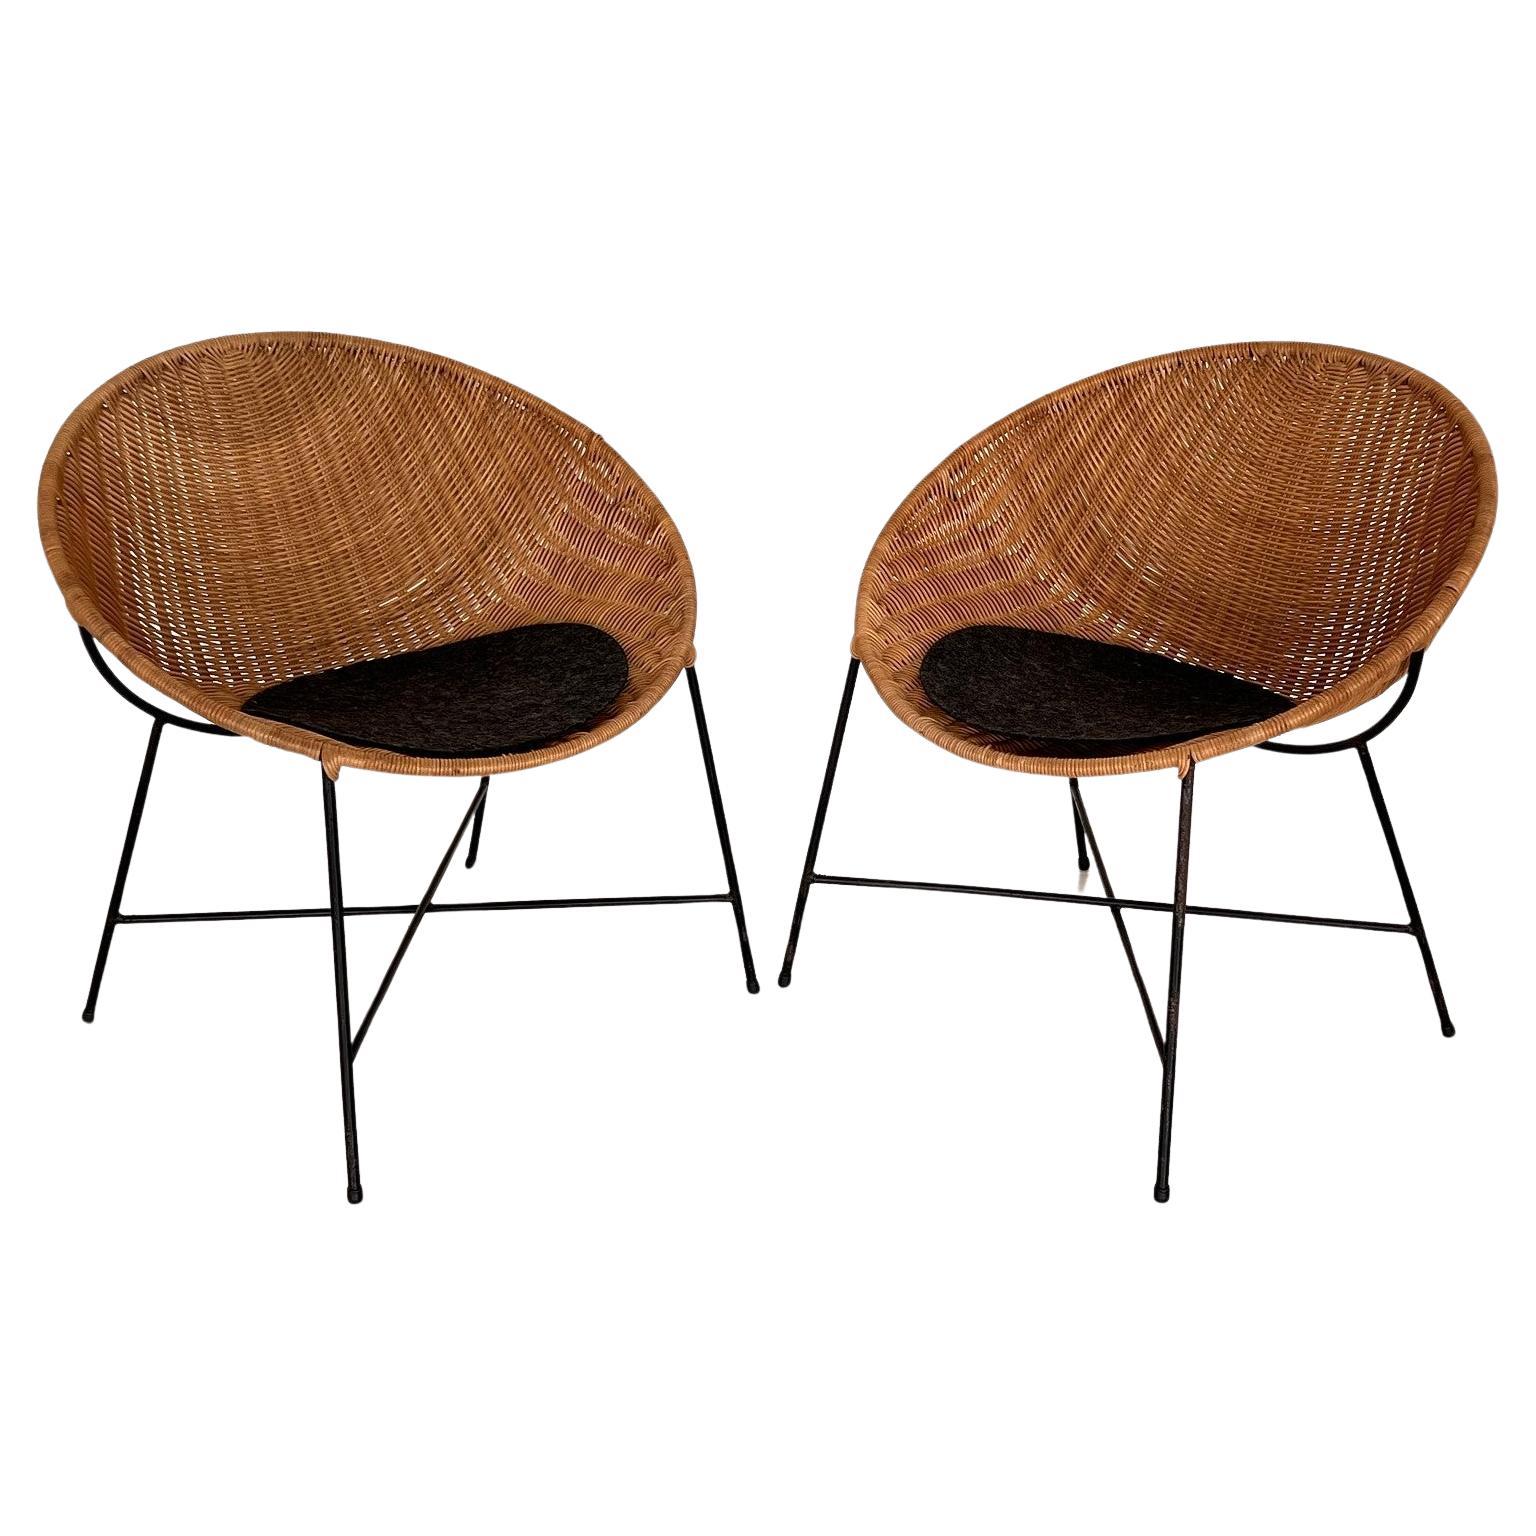 Pair of Mid-Century Rattan Lounge Chairs, 1970s For Sale